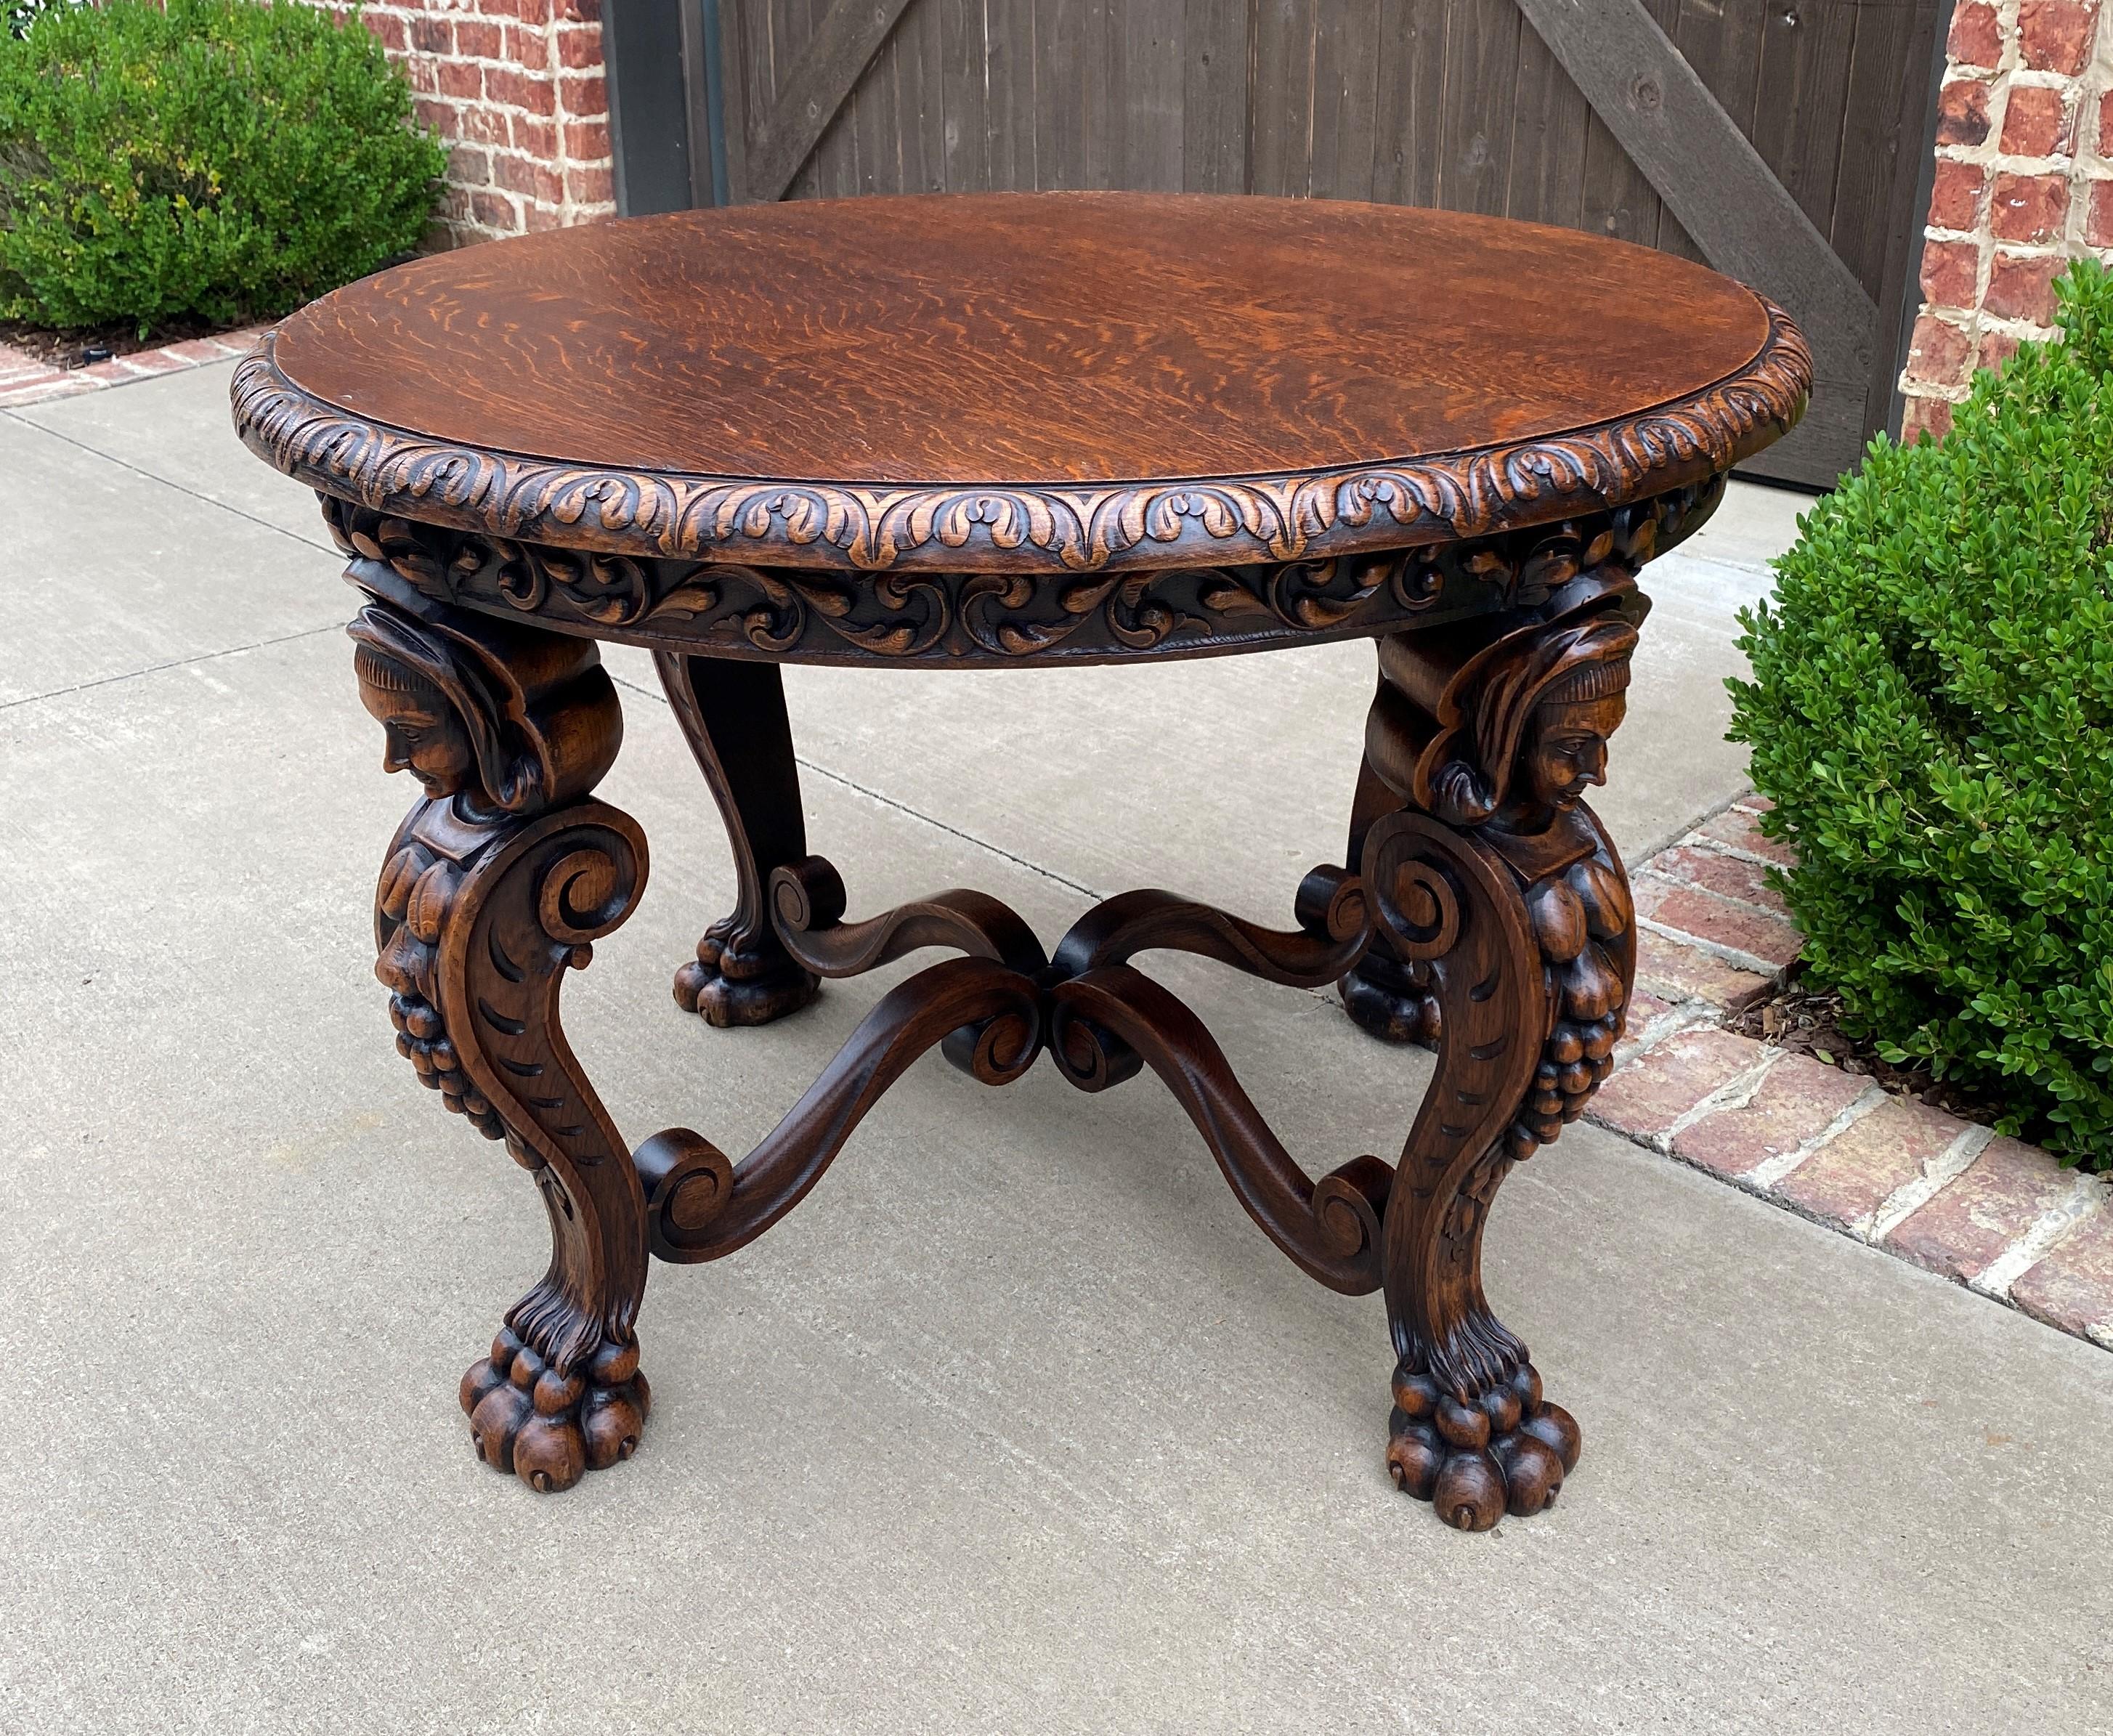 Antique French Round Table Entry Sofa Foyer Coffee Table Renaissance Revival Oak For Sale 7